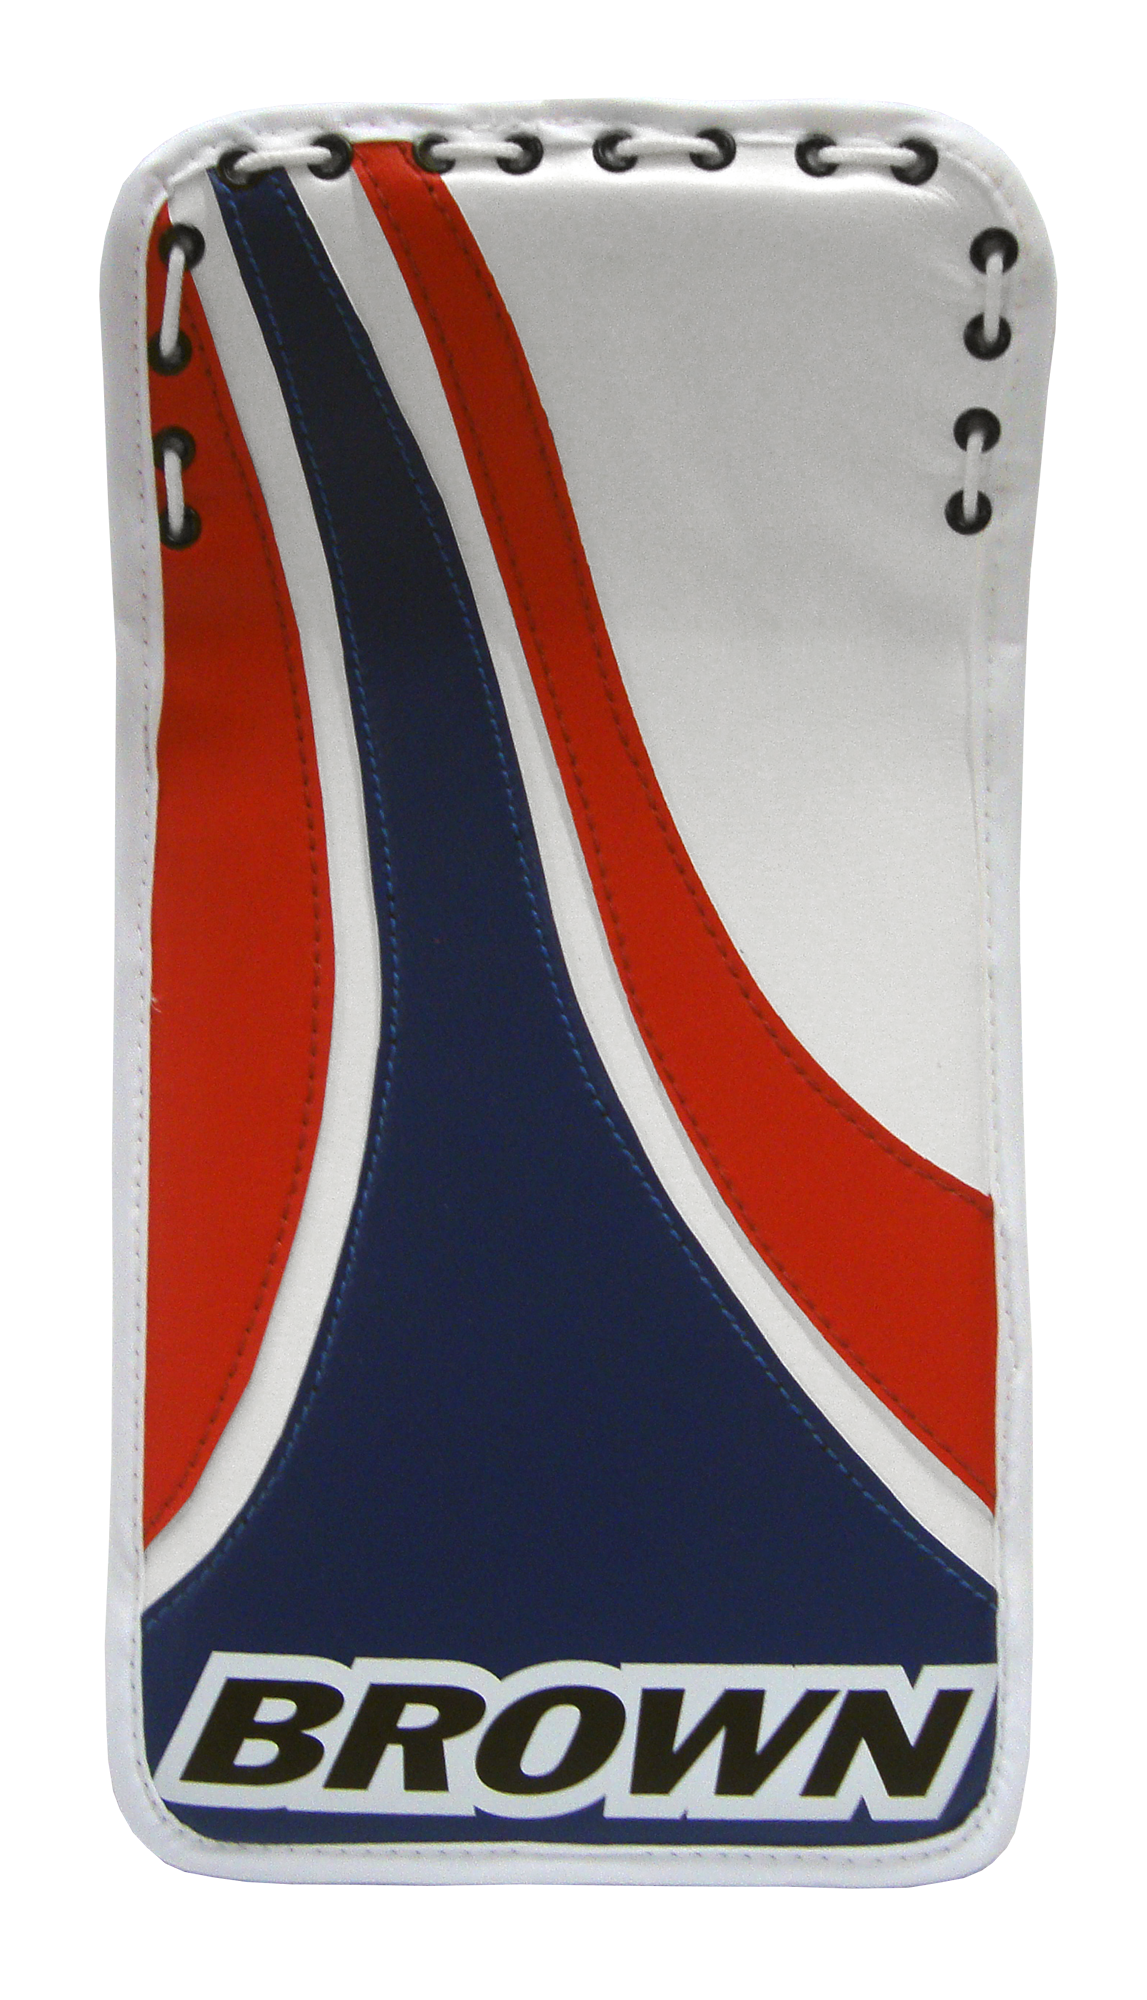 2400 white, red and blue stick glove